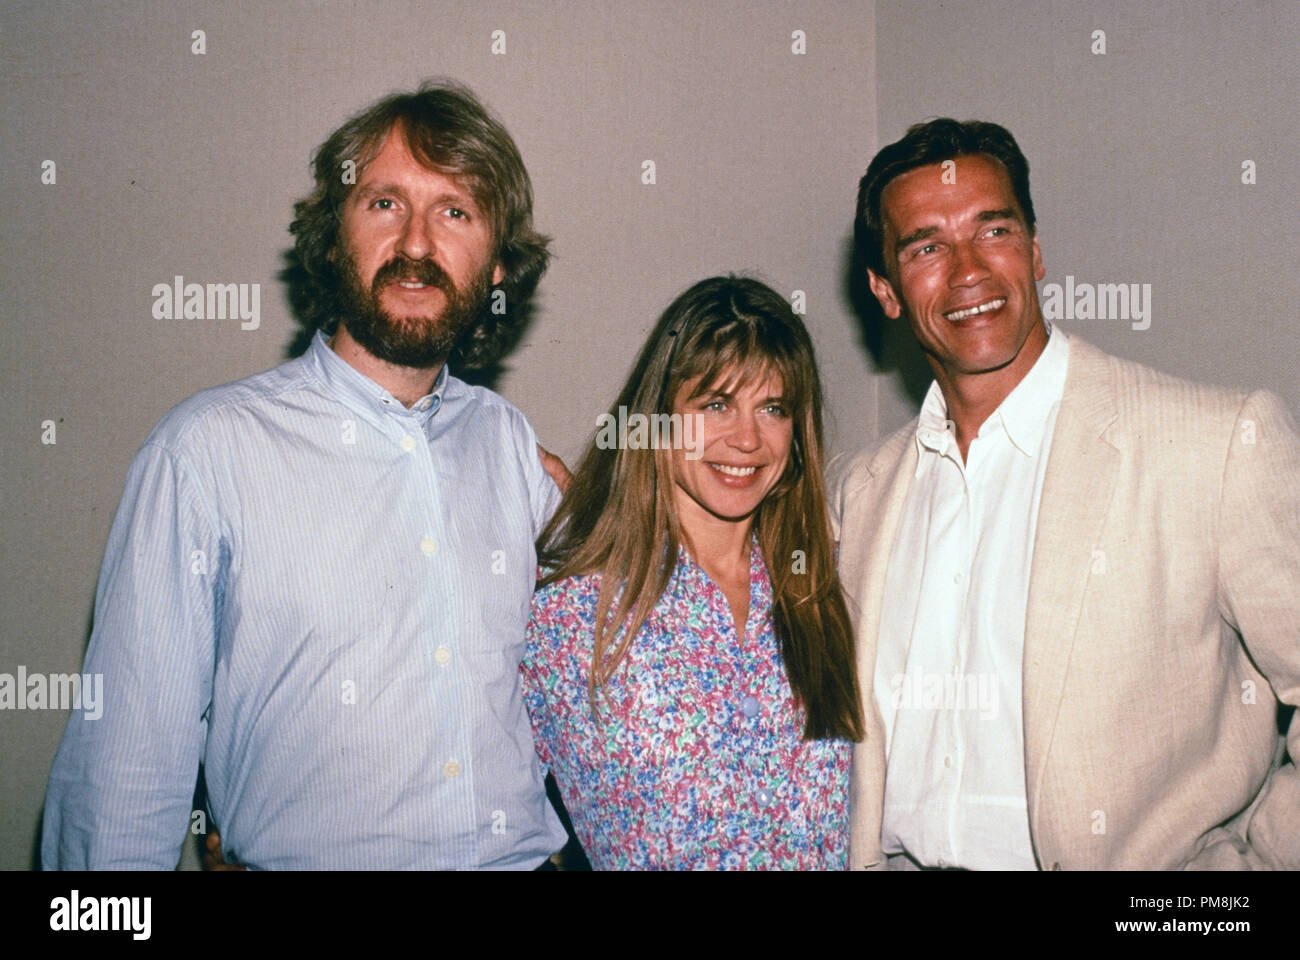 Arnold Schwarzenegger, Linda Hamilton, James Cameron at 'The Terminator' press conference 1984 © JRC /The Hollywood Archive  -  All Rights Reserved  File Reference # 31515 465 Stock Photo